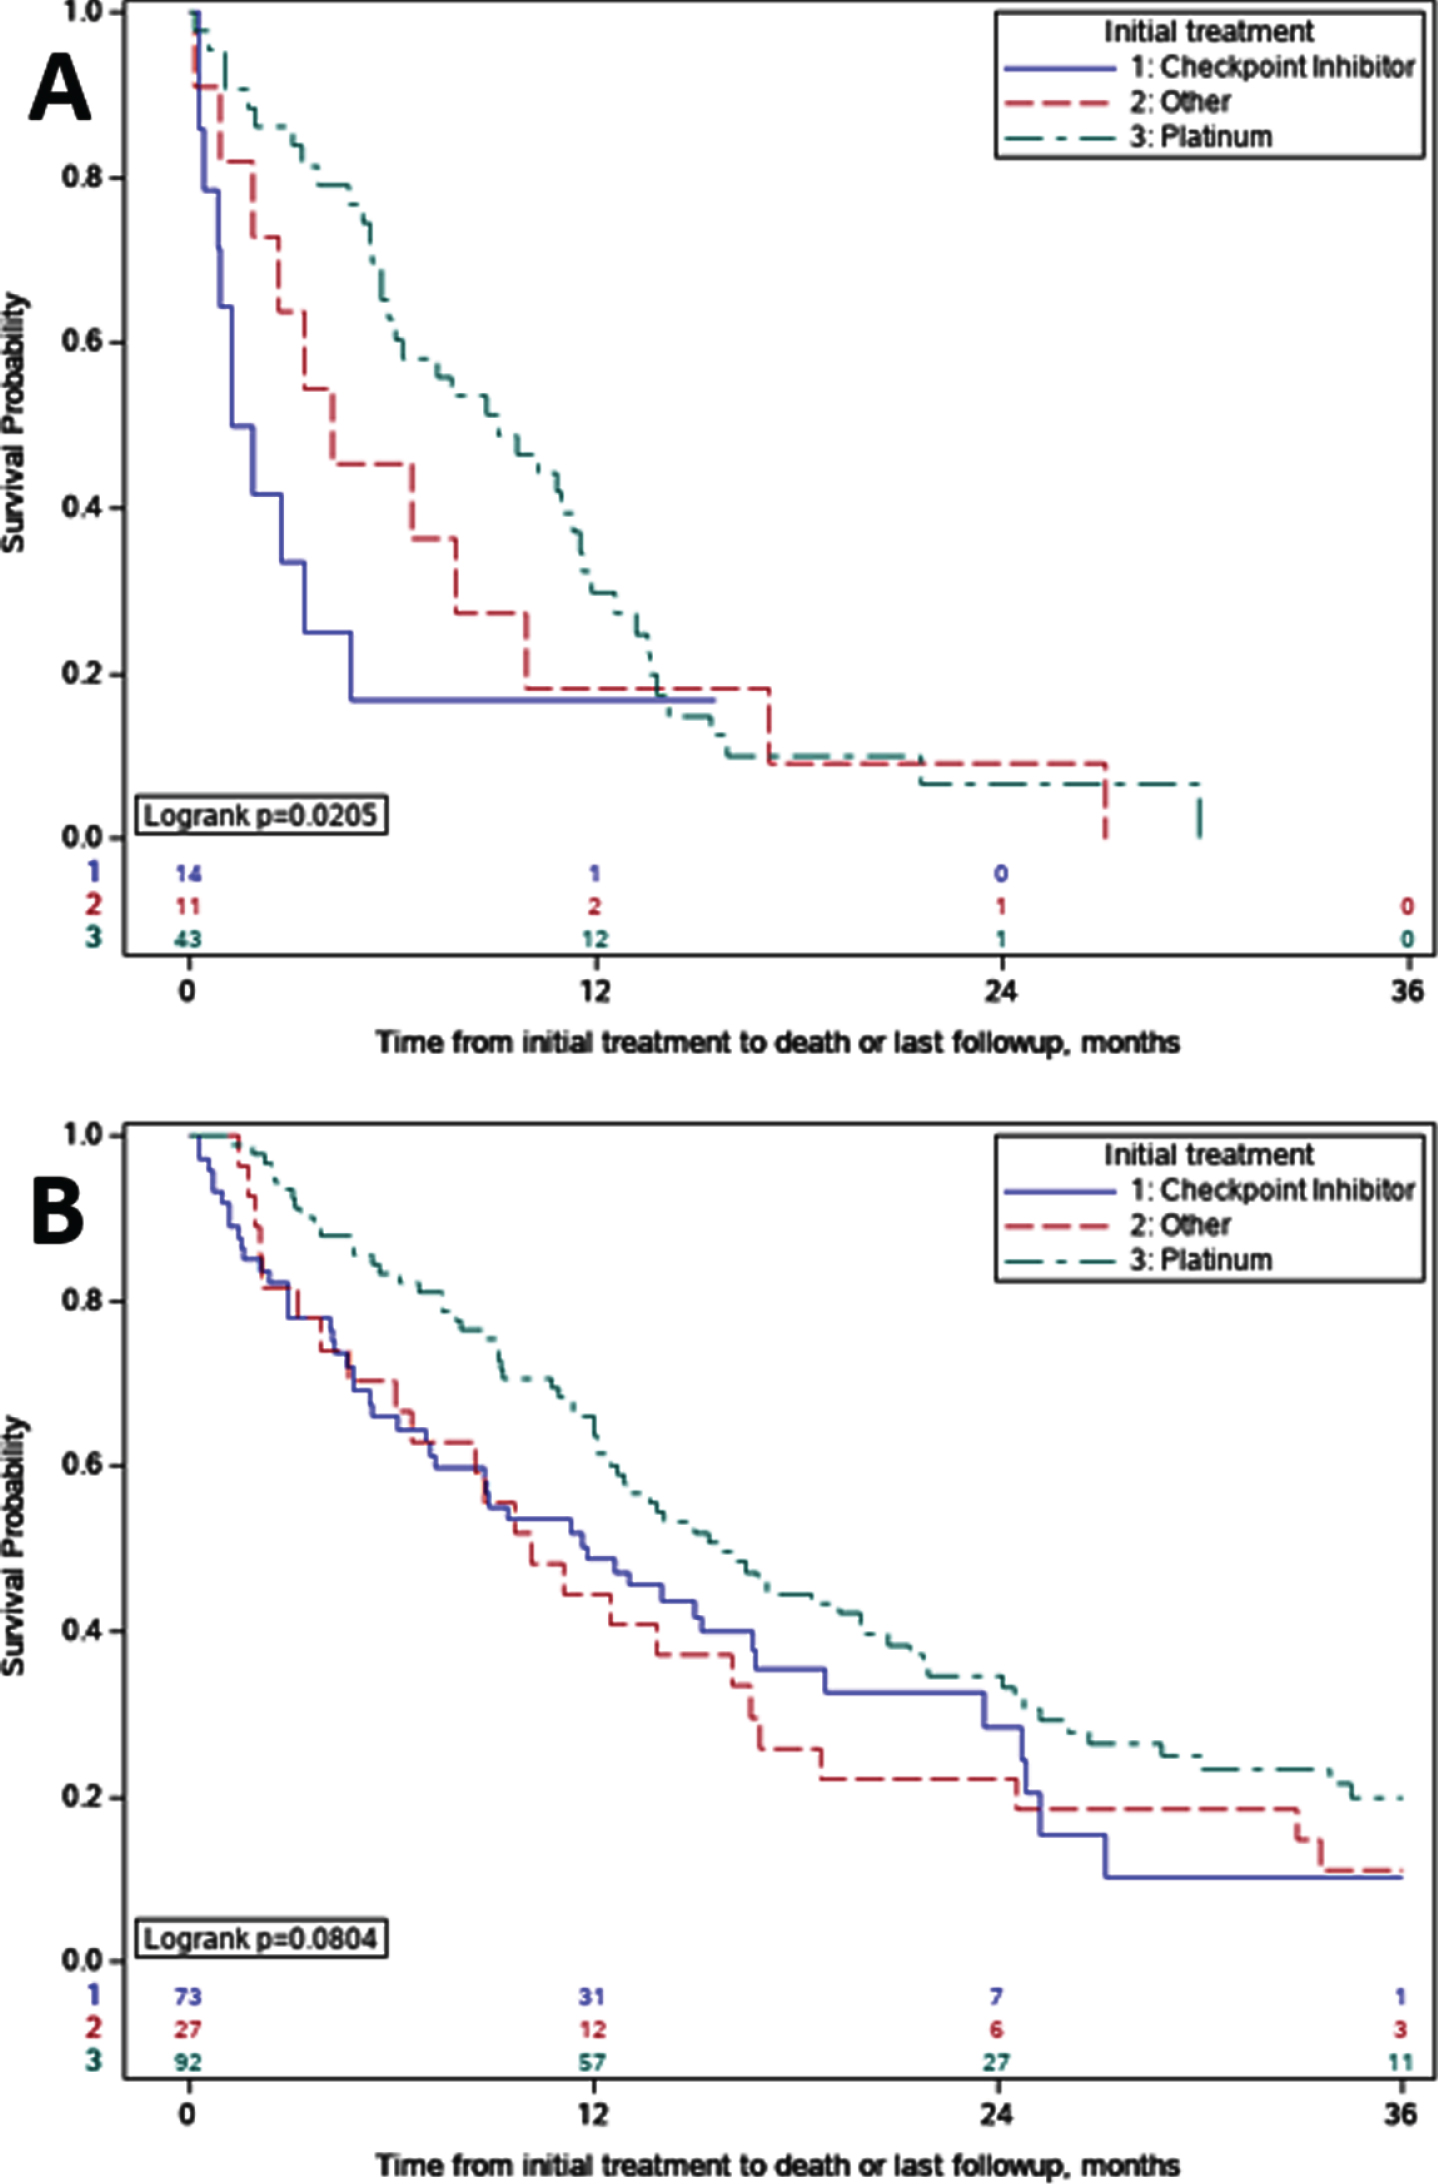 Overall Survival Comparisons by Initial Treatment. A. Early Bone Metastases (eBM); For patients with eBM treated with immune checkpoint inhibitors versus platinum, overall survival was 1.6 vs 9.1 months (p = 0.02). B. No Early Bone Metastases (nBM). For patients with nBM treated with immune checkpoint inhibitors versus platinum, overall survival was 11.8 vs 15.8 months (p = 0.11).